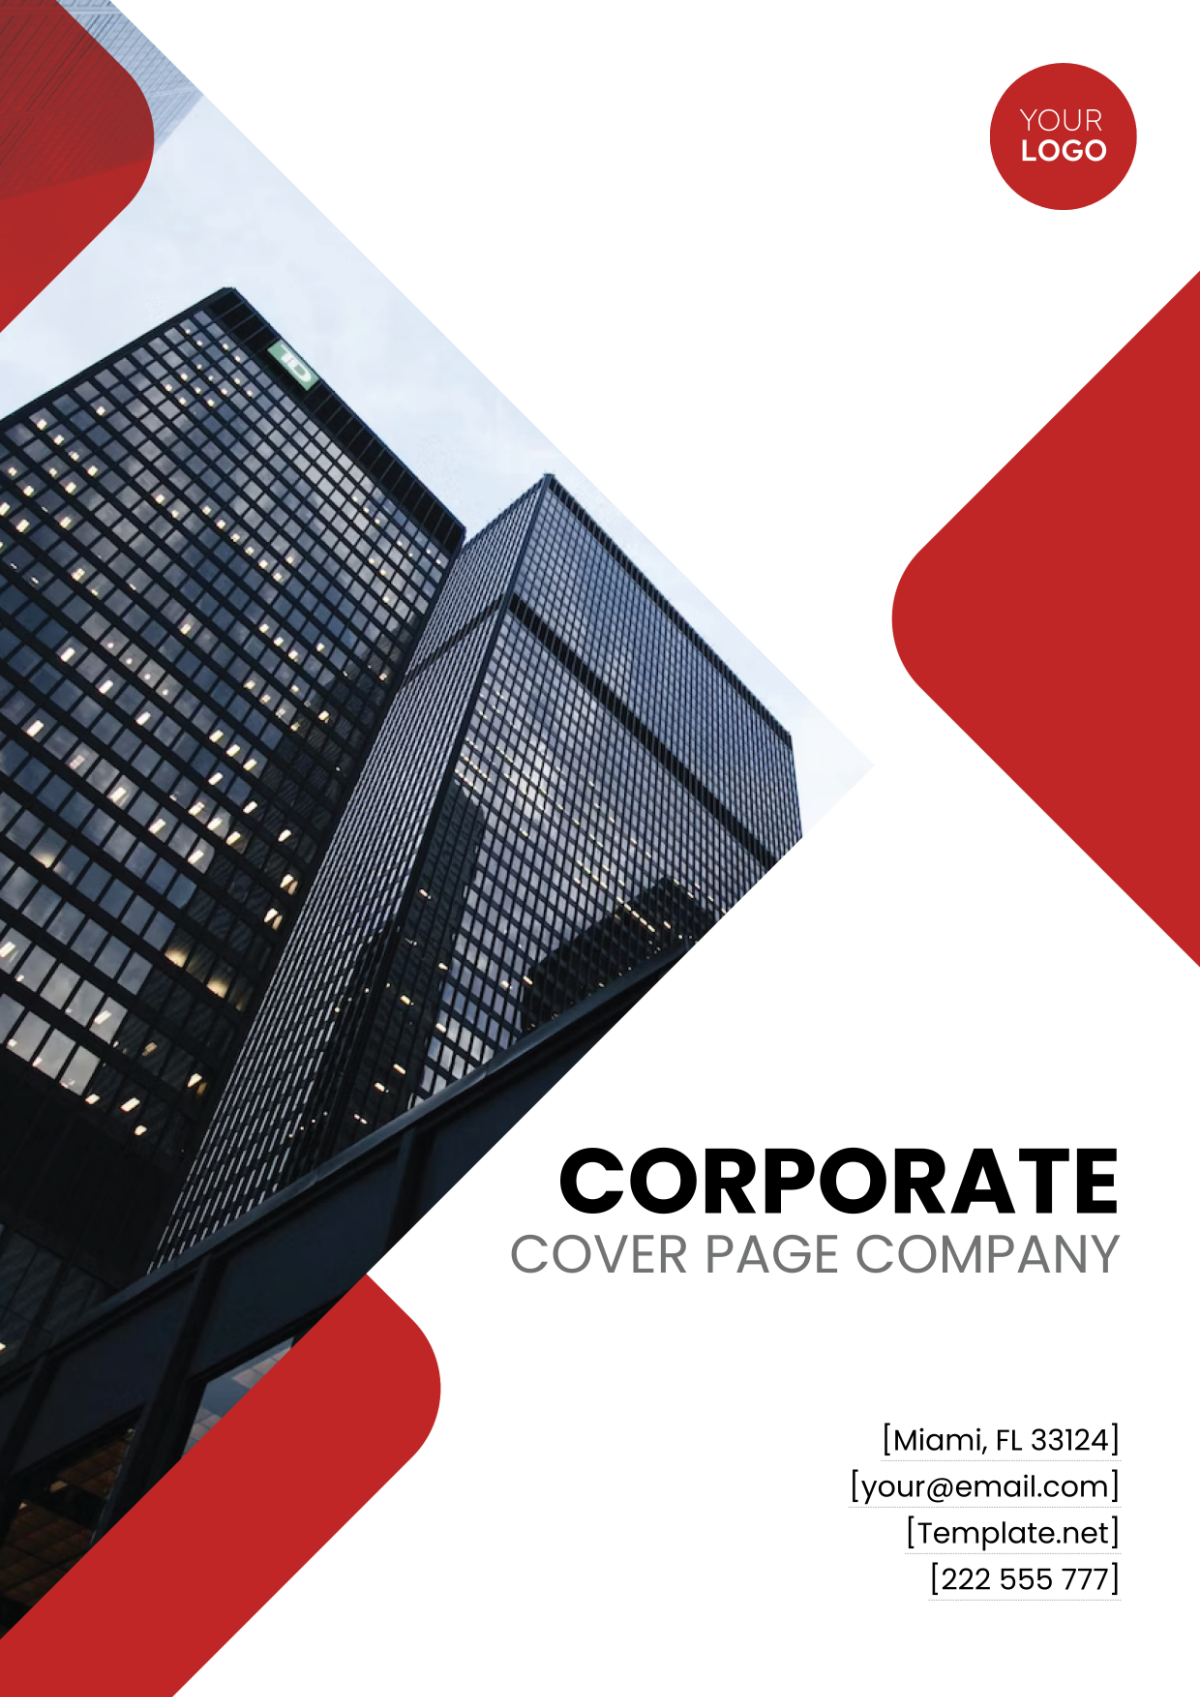 Corporate Cover Page Company Template